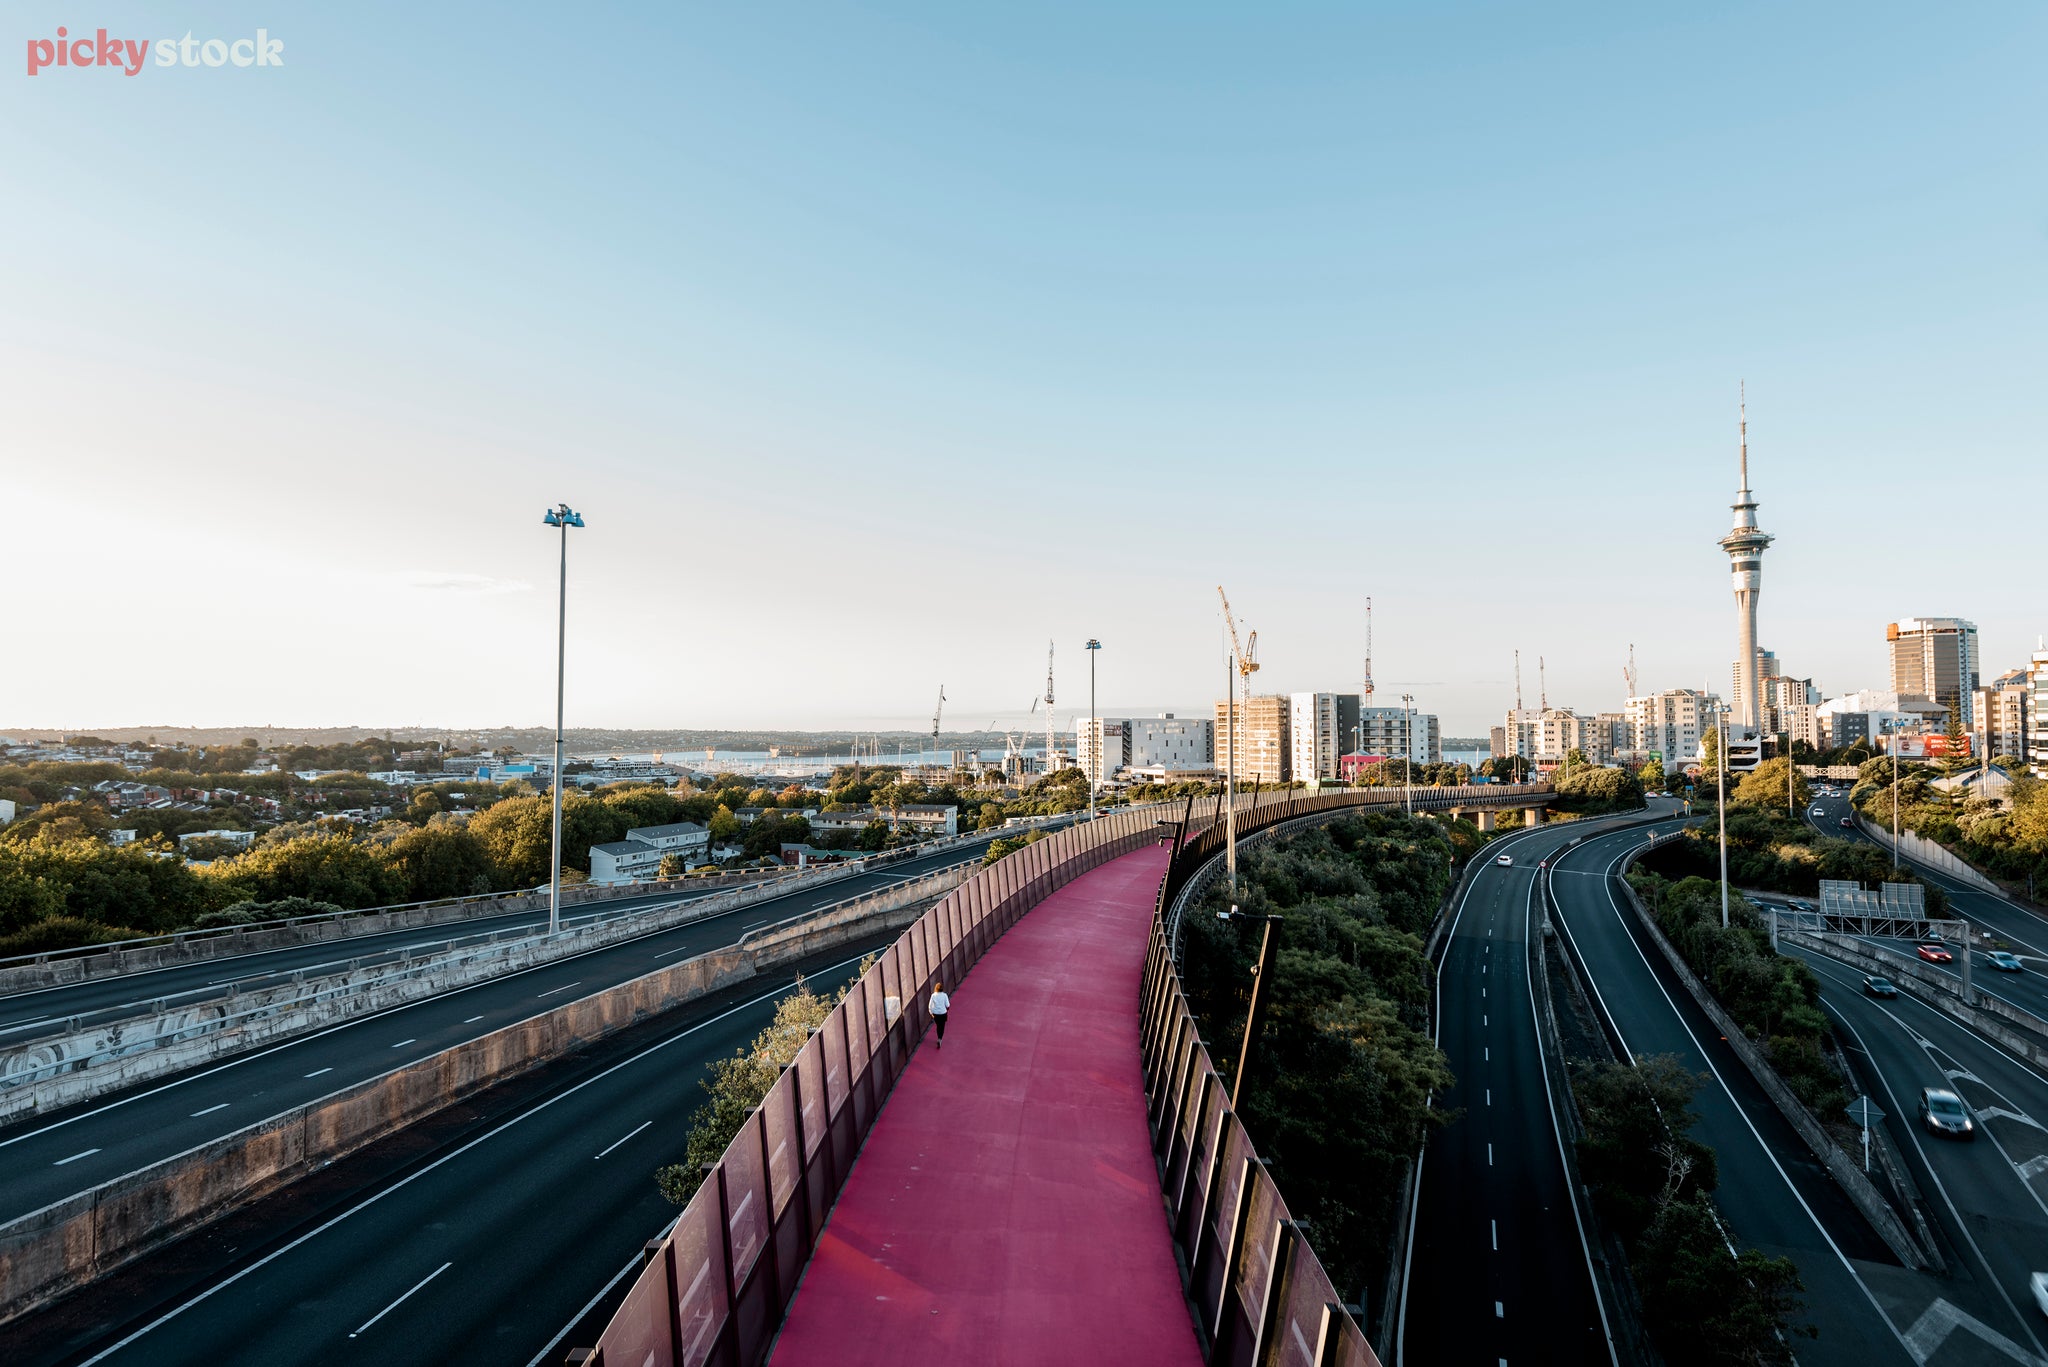 A lone jogger makes their way towards Auckland city. Where the Sky Tower, a tall narrow building stands above the cities skyline. Cranes dot the skyline as. Under the lightpath, motorways cross eachother forming the spagehetti junction.